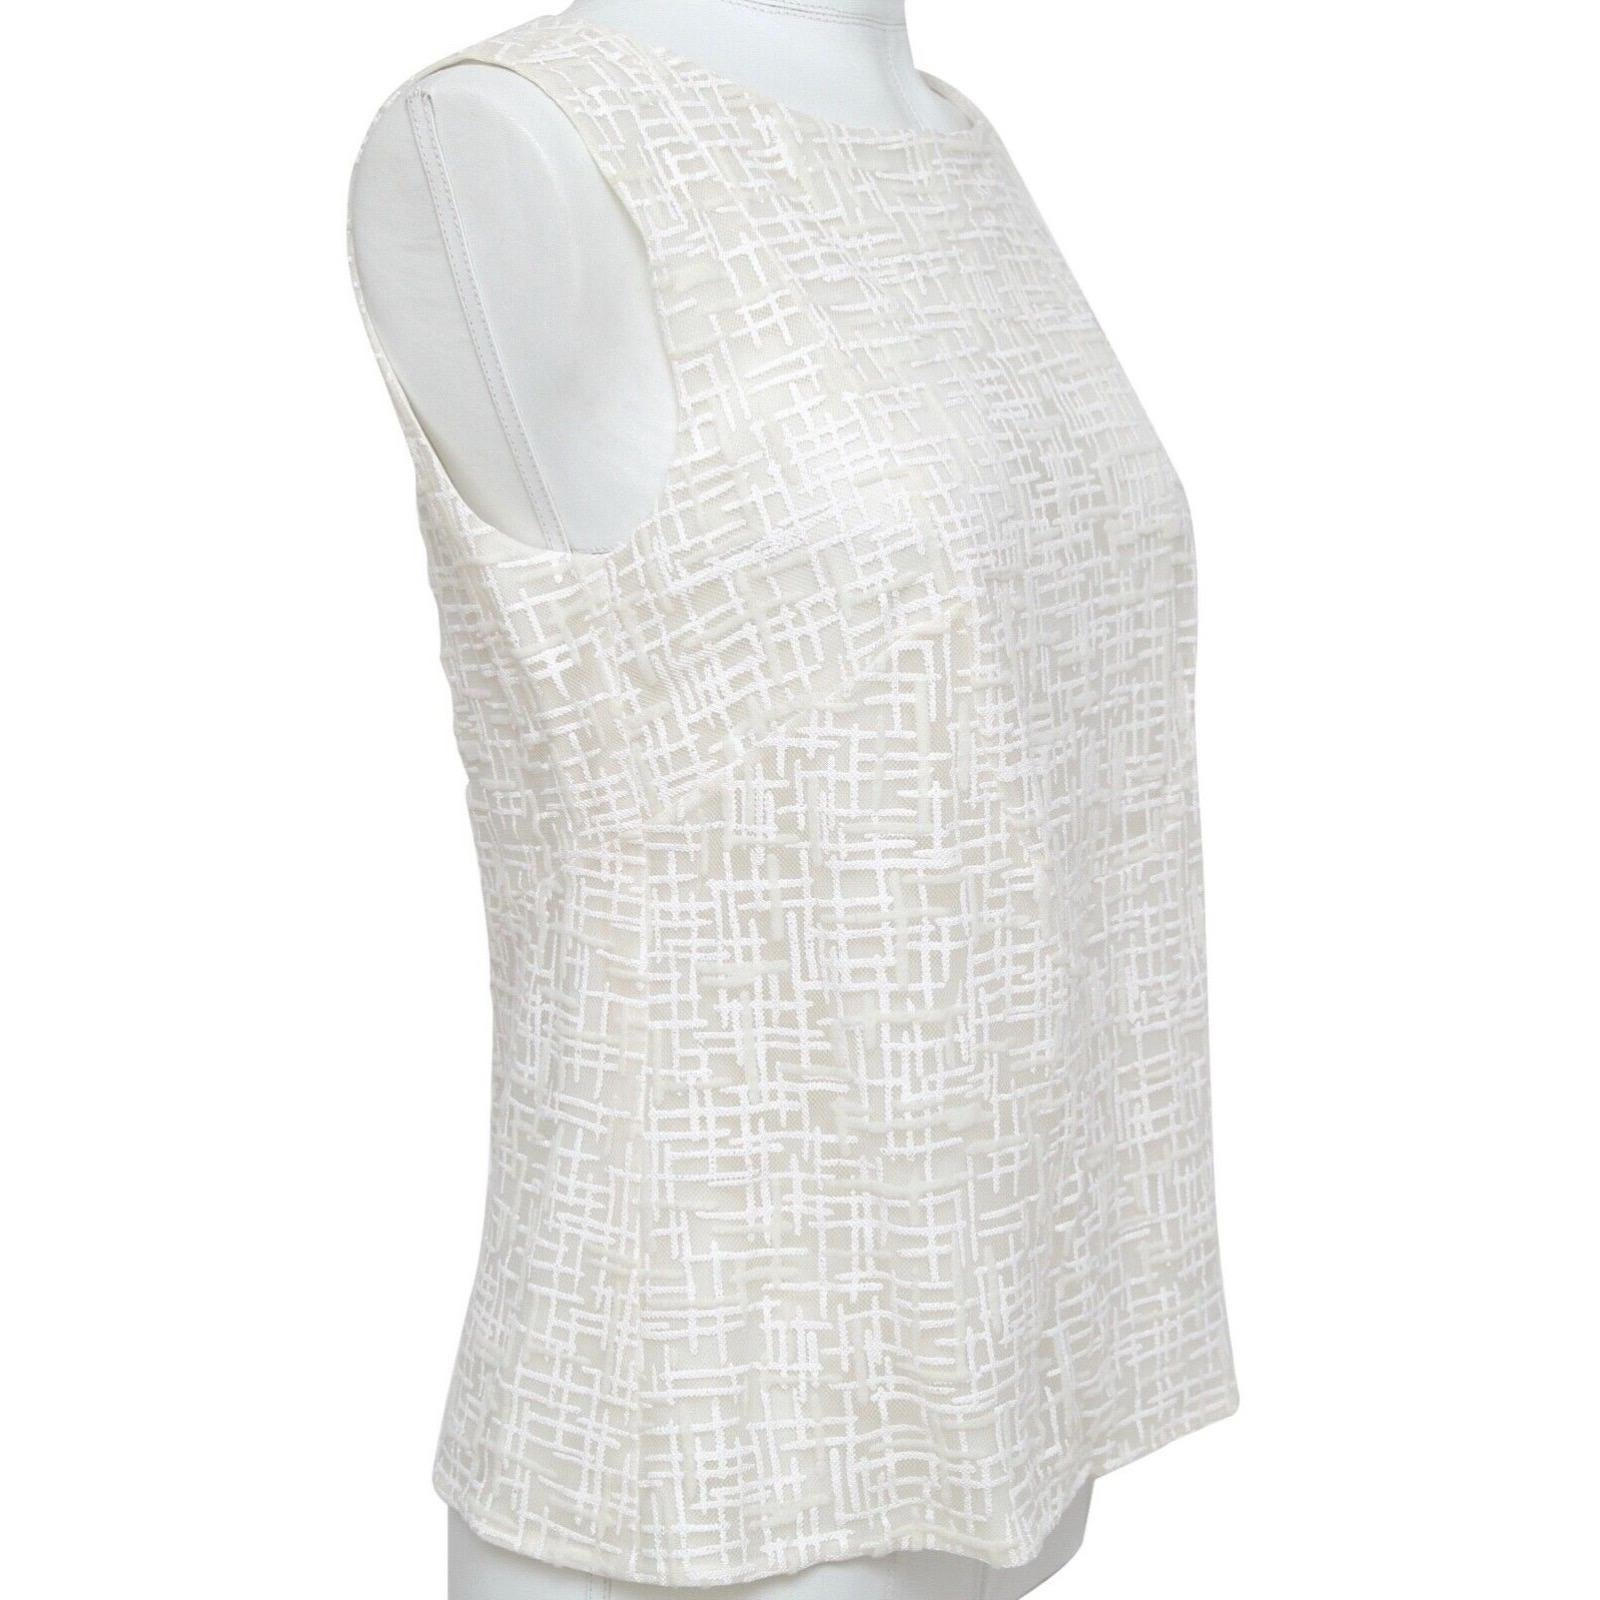 GUARANTEED AUTHENTIC CHANEL SPRING 2012 IVORY SLEEVELESS PATTERNED TOP


Design:
o Ivory sleeveless blouse.
o Mesh/glitter pattern.
o Scoop neck.
o Faux Pearl CC button closure at back of neck.
o Lined.

Size: 40

Material: 67% Rayon, 22% Polyester,